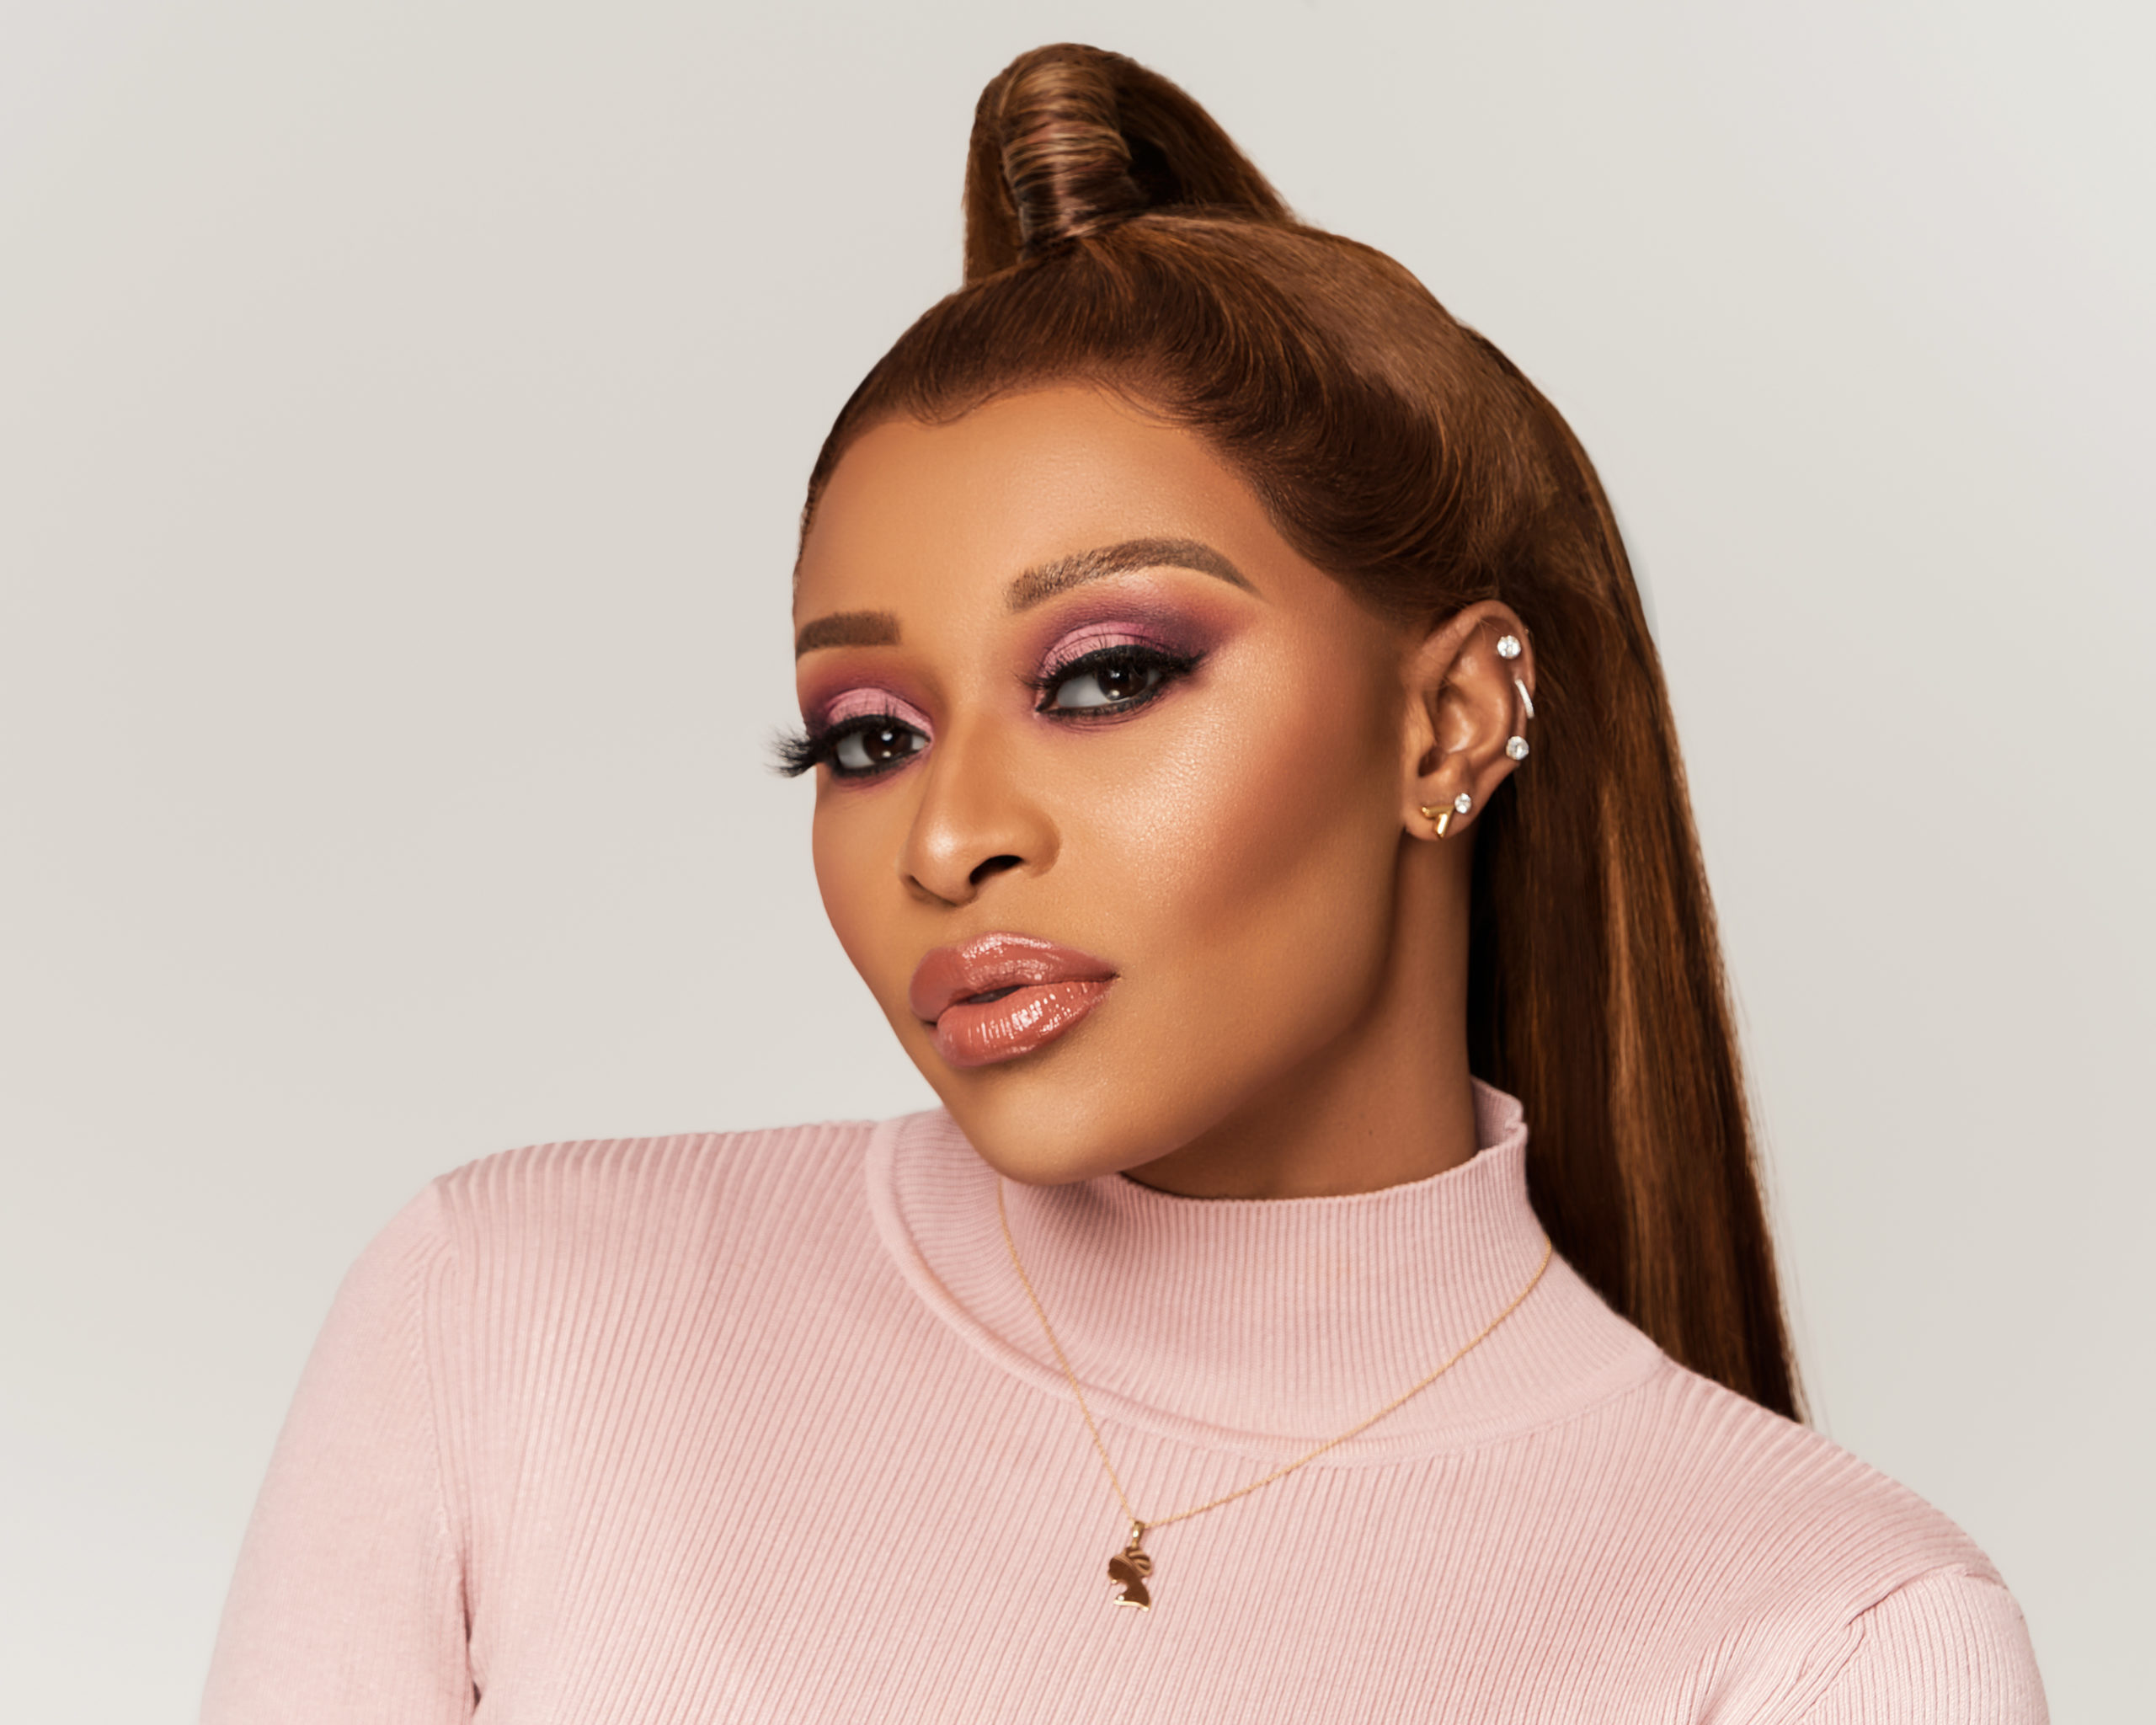 DJ Zinhle unveils Baby Bump in Teaser for Upcoming Reality Show 